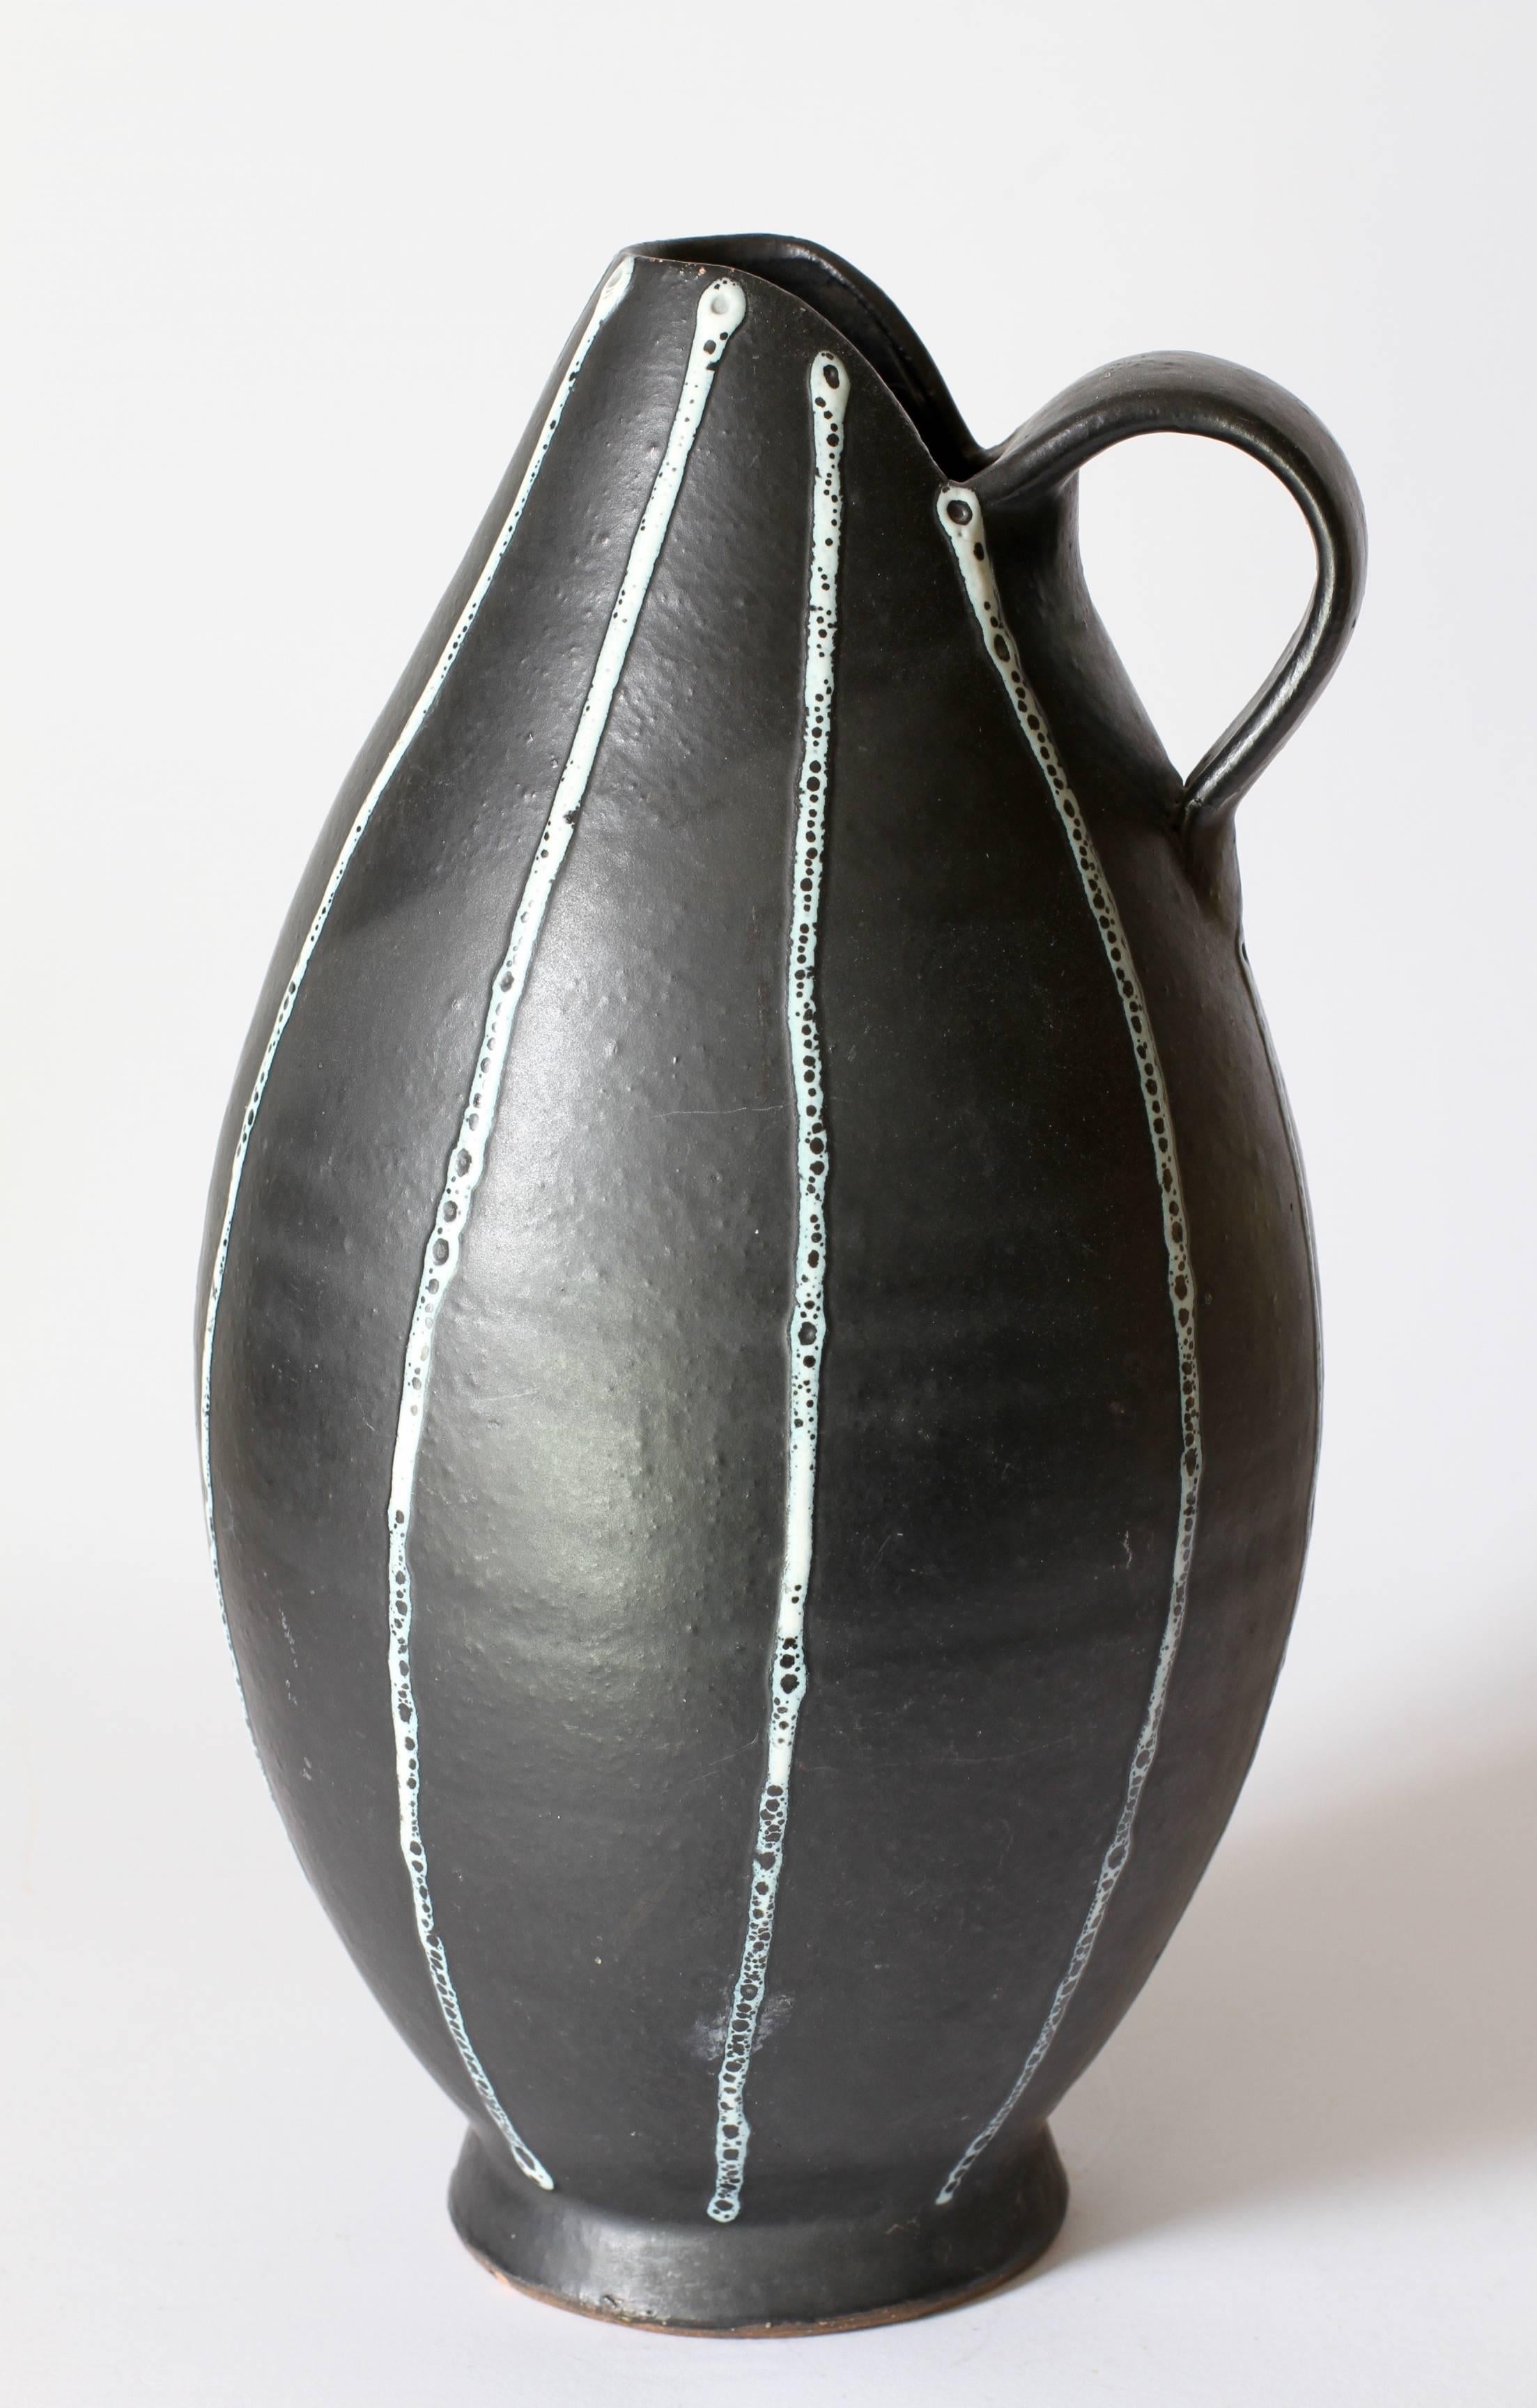 This elegant jug or pitcher was hand thrown by an unknown studio potter, circa 1950-1959. It is certainly of European origin and most likely German made as it has very similar glaze techniques to those found on vases from the West German Pottery